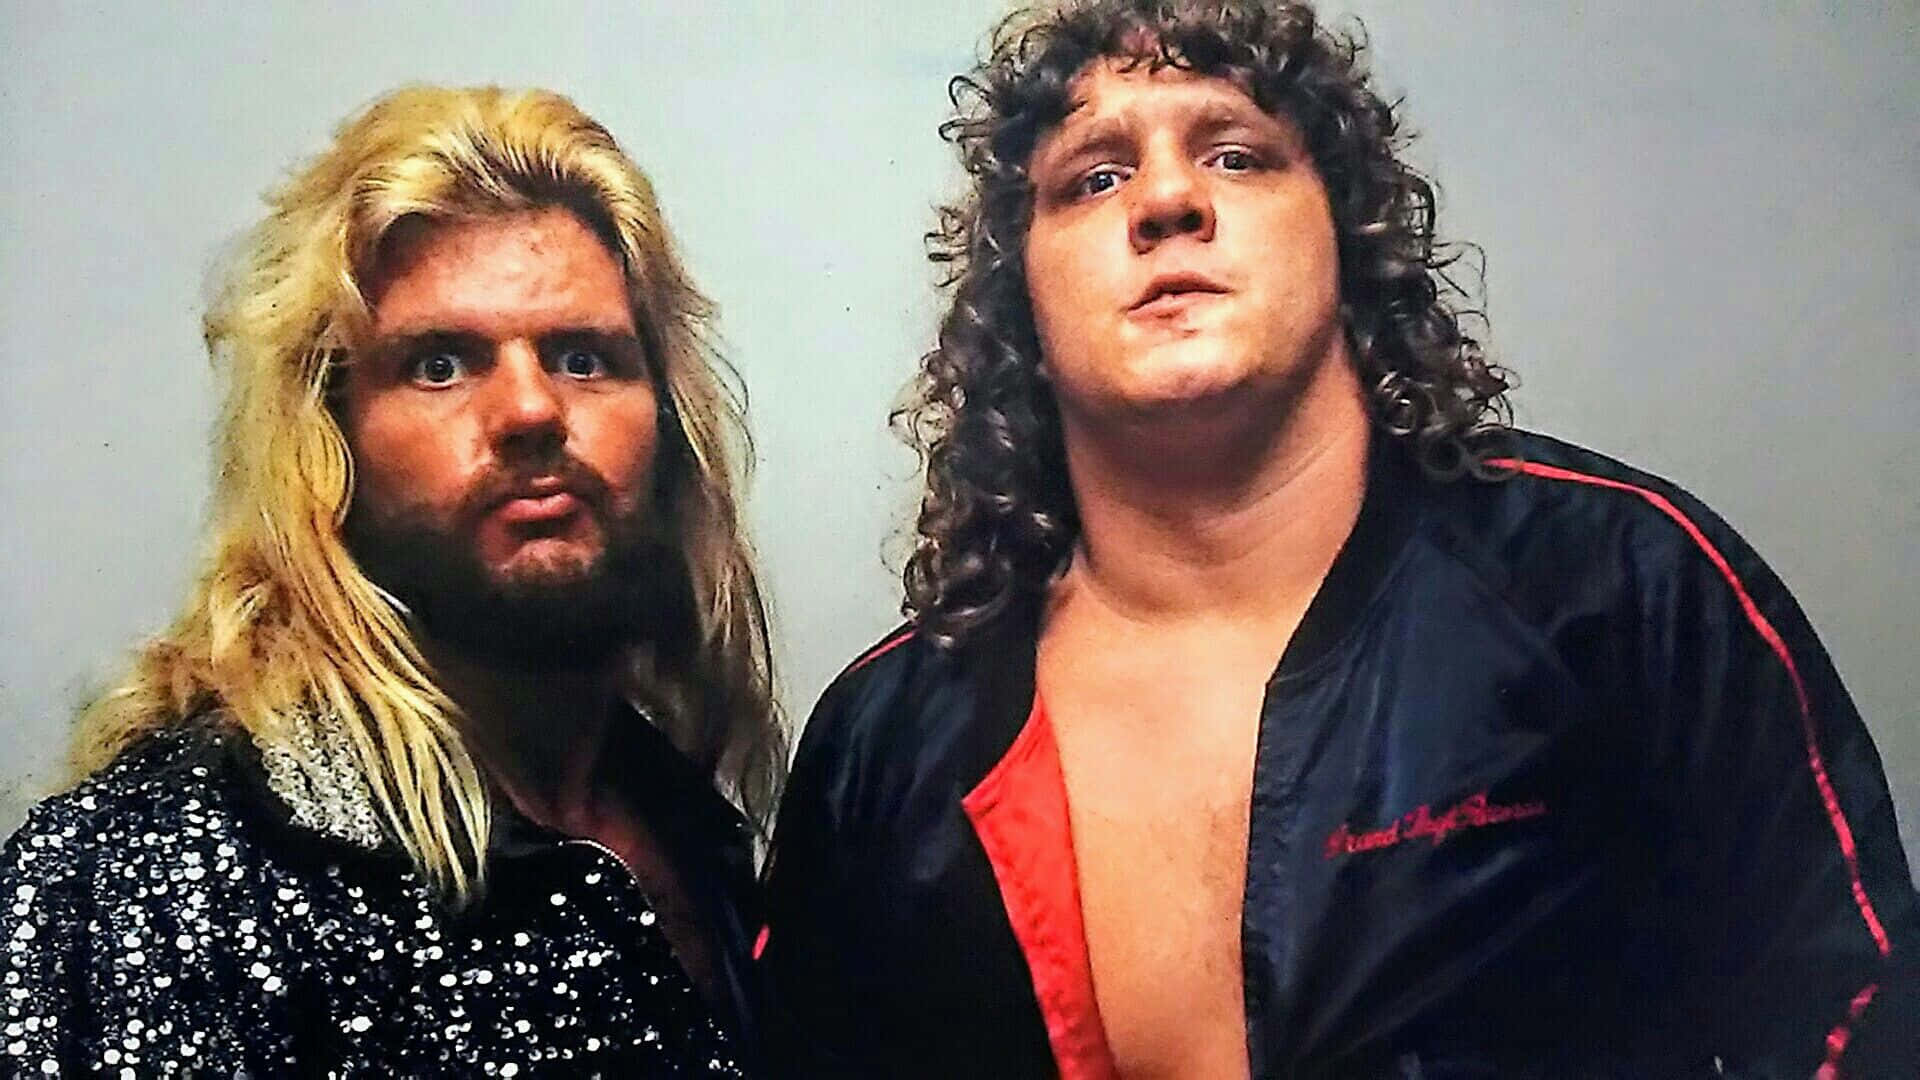 Wrestling Legends Terry Gordy and Michael Hayes in Action Wallpaper